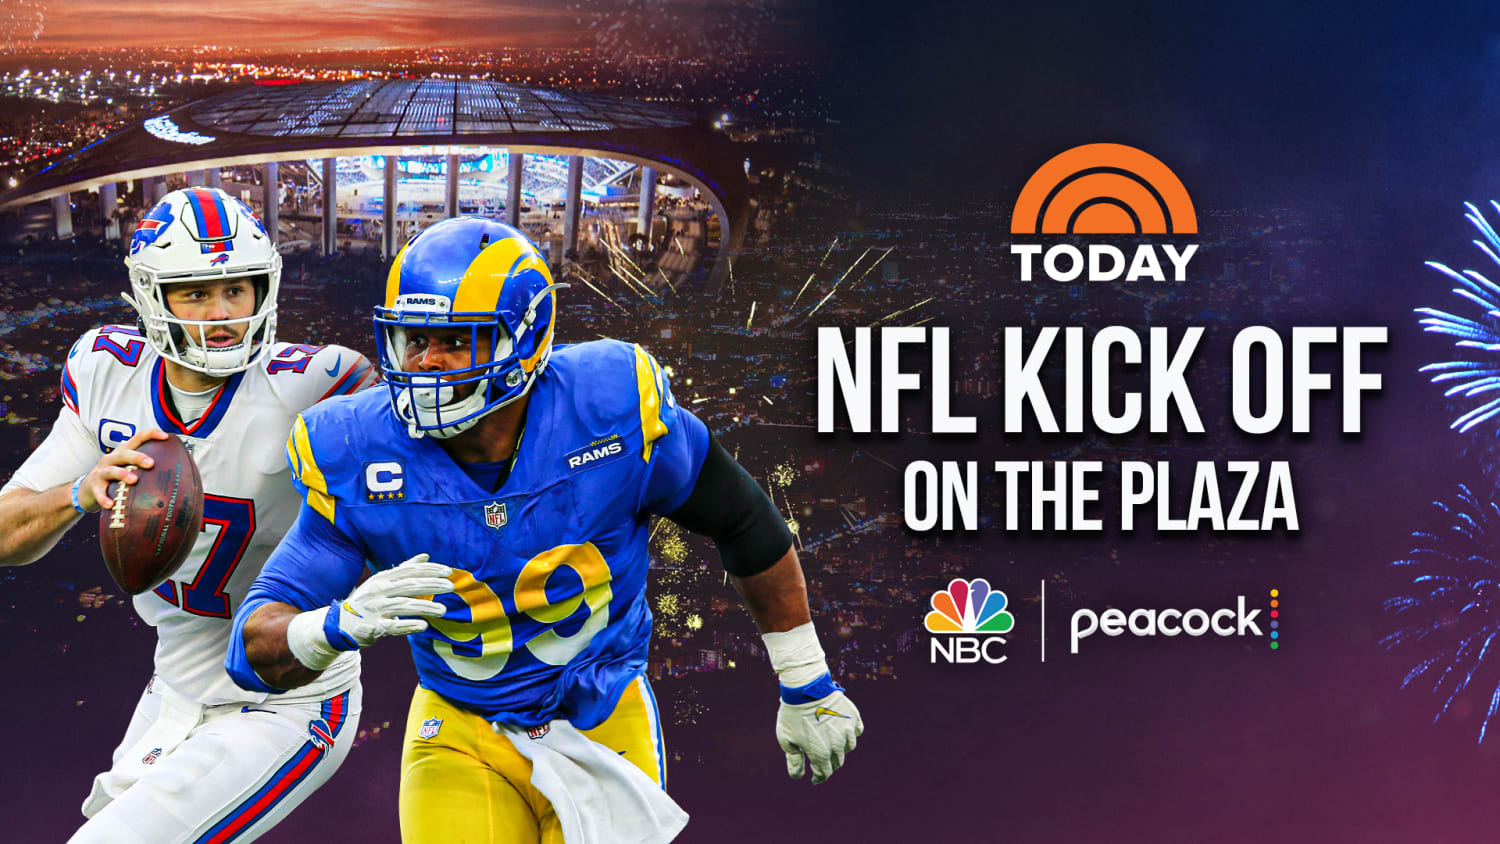 Join TODAY's NFL Kickoff watch party on the Plaza!